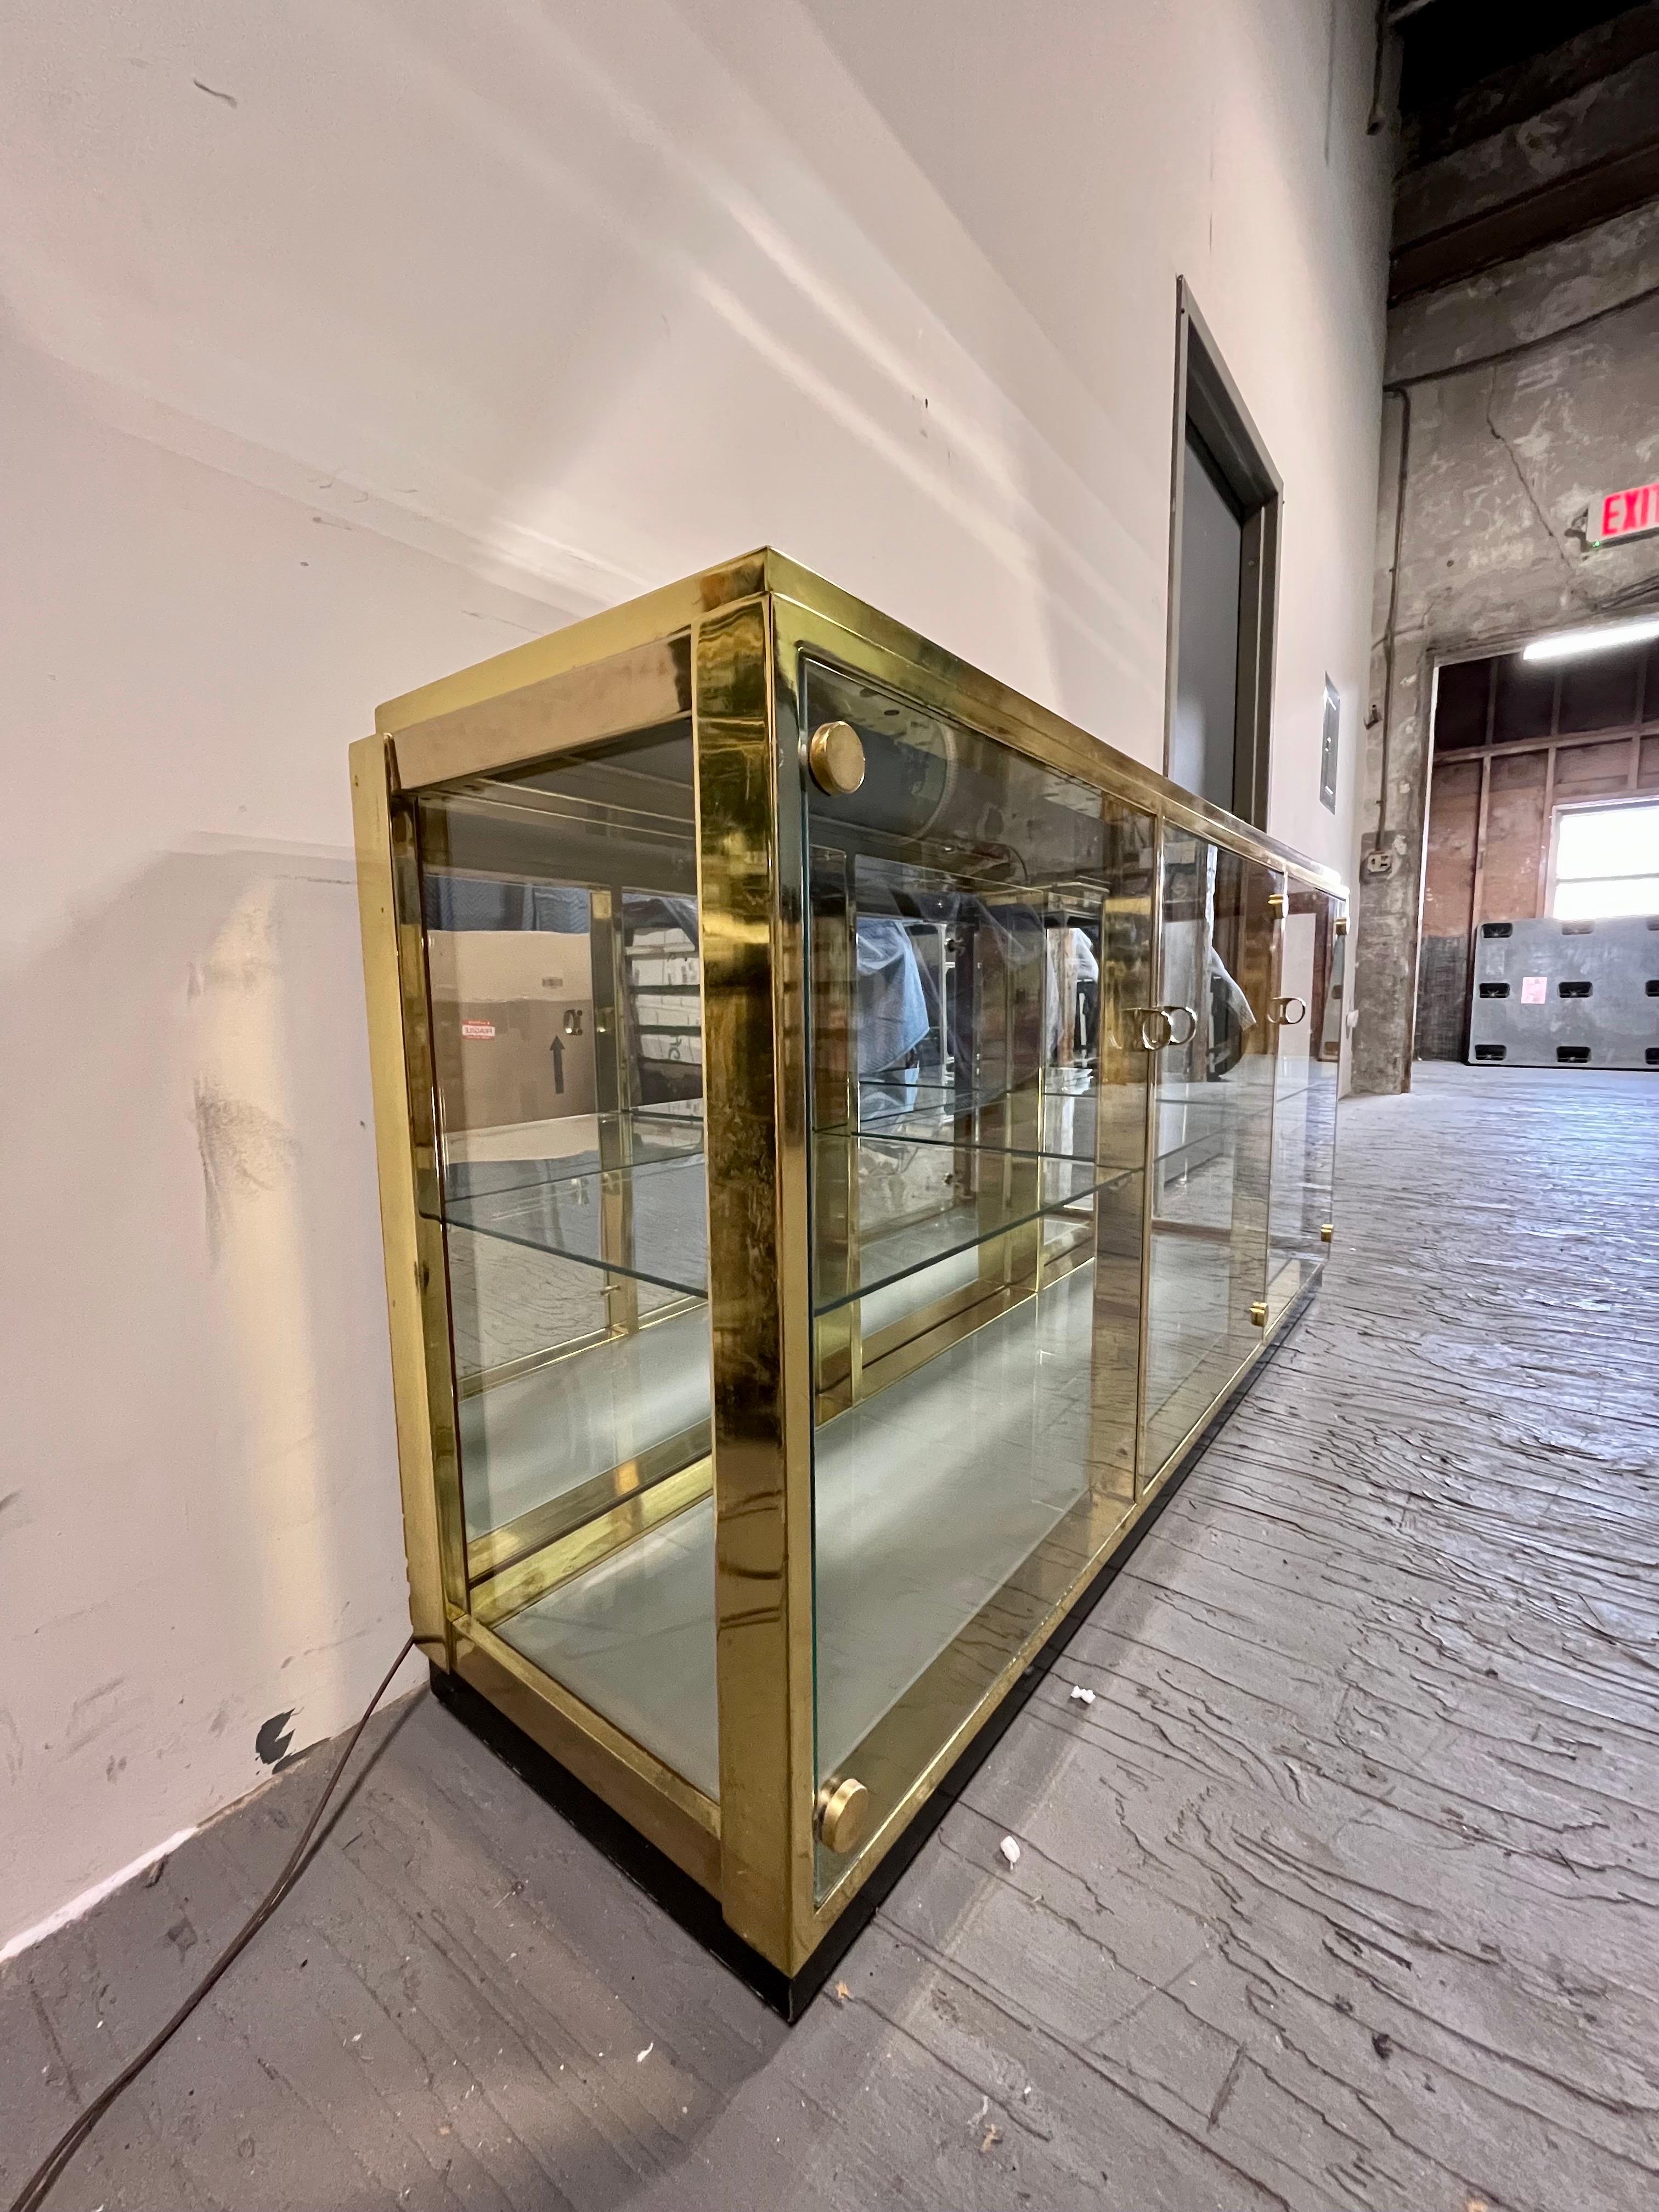 The perfect home for a vast collection of personal treasures. This Regency display case is framed with patinated brass and faced with several panels of glass to show off its interior, topped with a beautiful piece of bevelled mirror. The case is